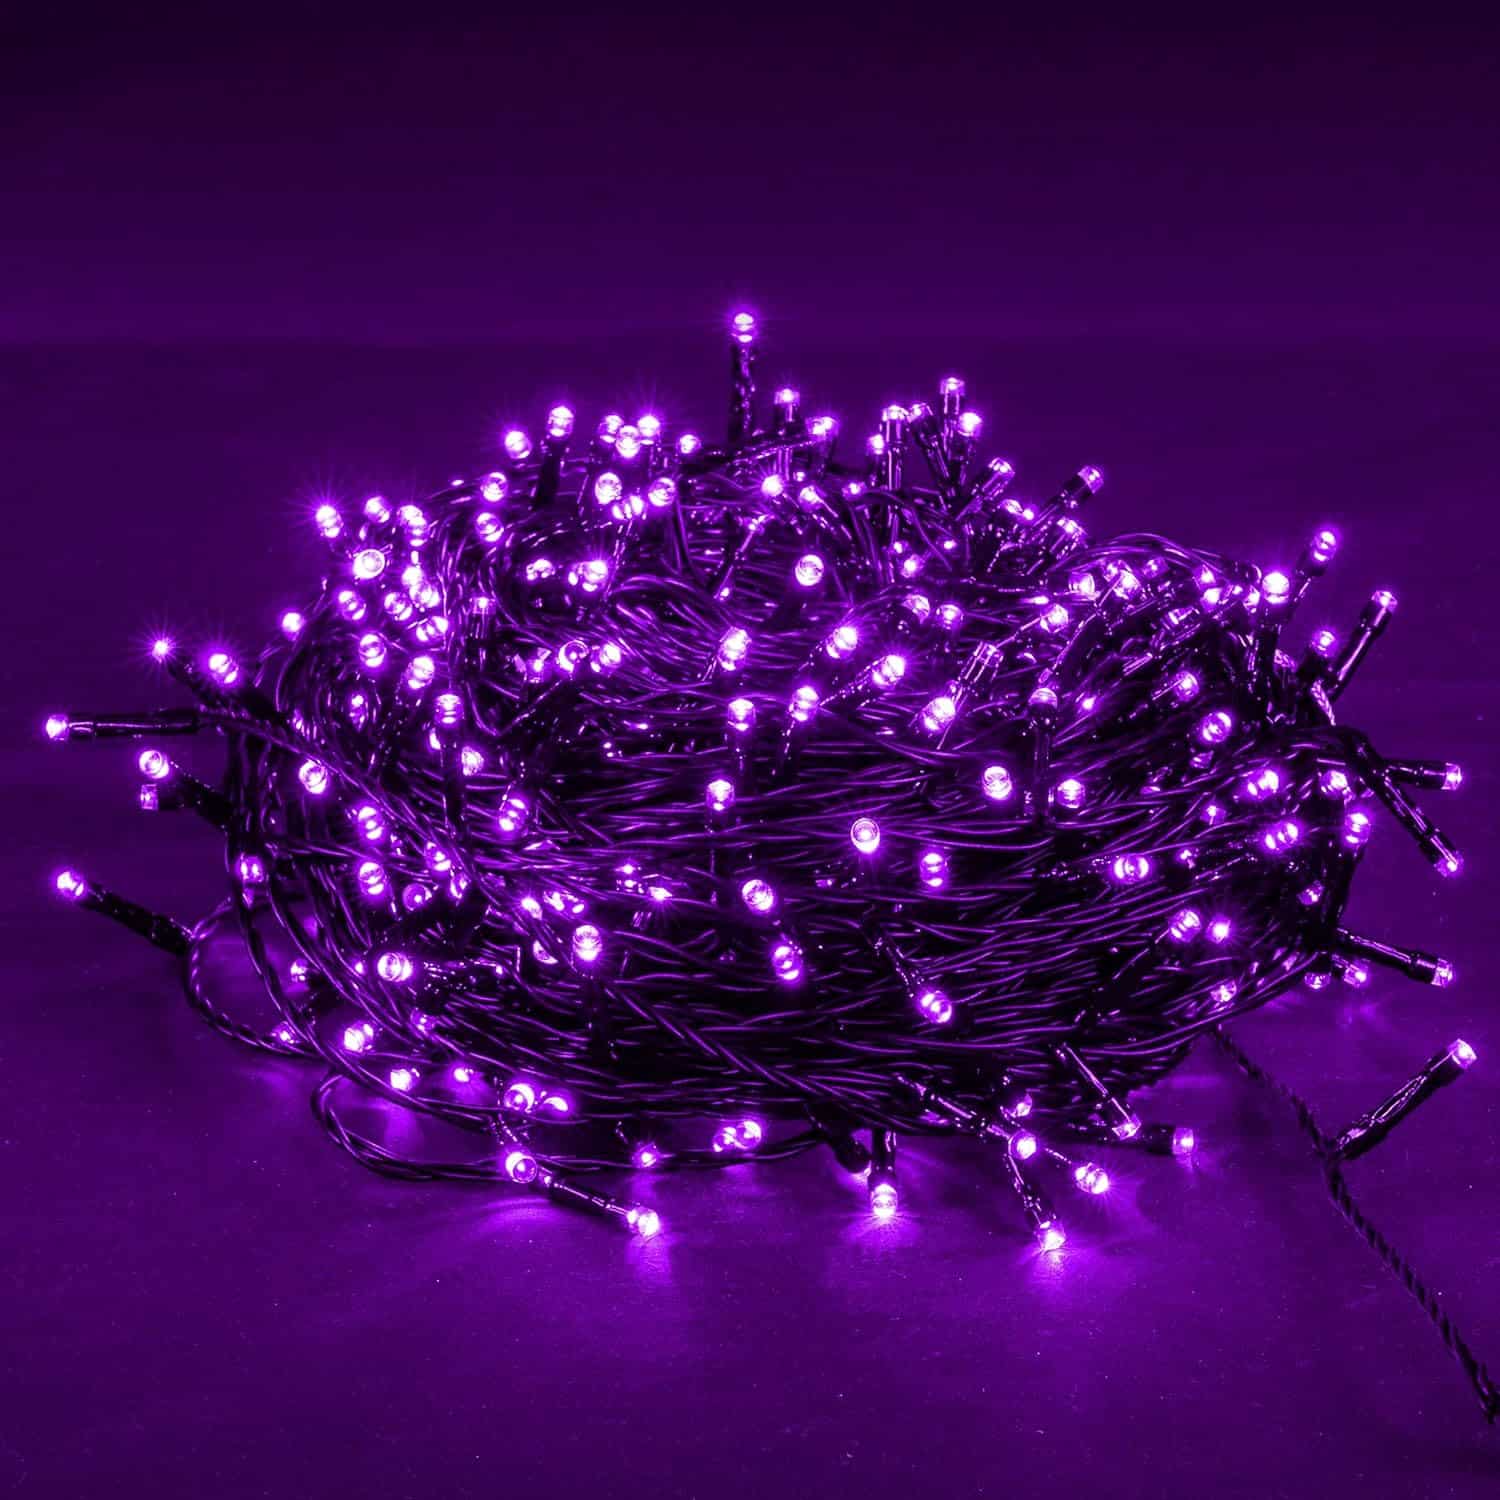 Dazzle Bright 300 LED Christmas String Lights, 100 FT Connectable Waterproof String Lights Green Wire with 8 Modes, Christmas Decorations for Indoor Outdoor Xmas Party Yard Garden (Warm White)